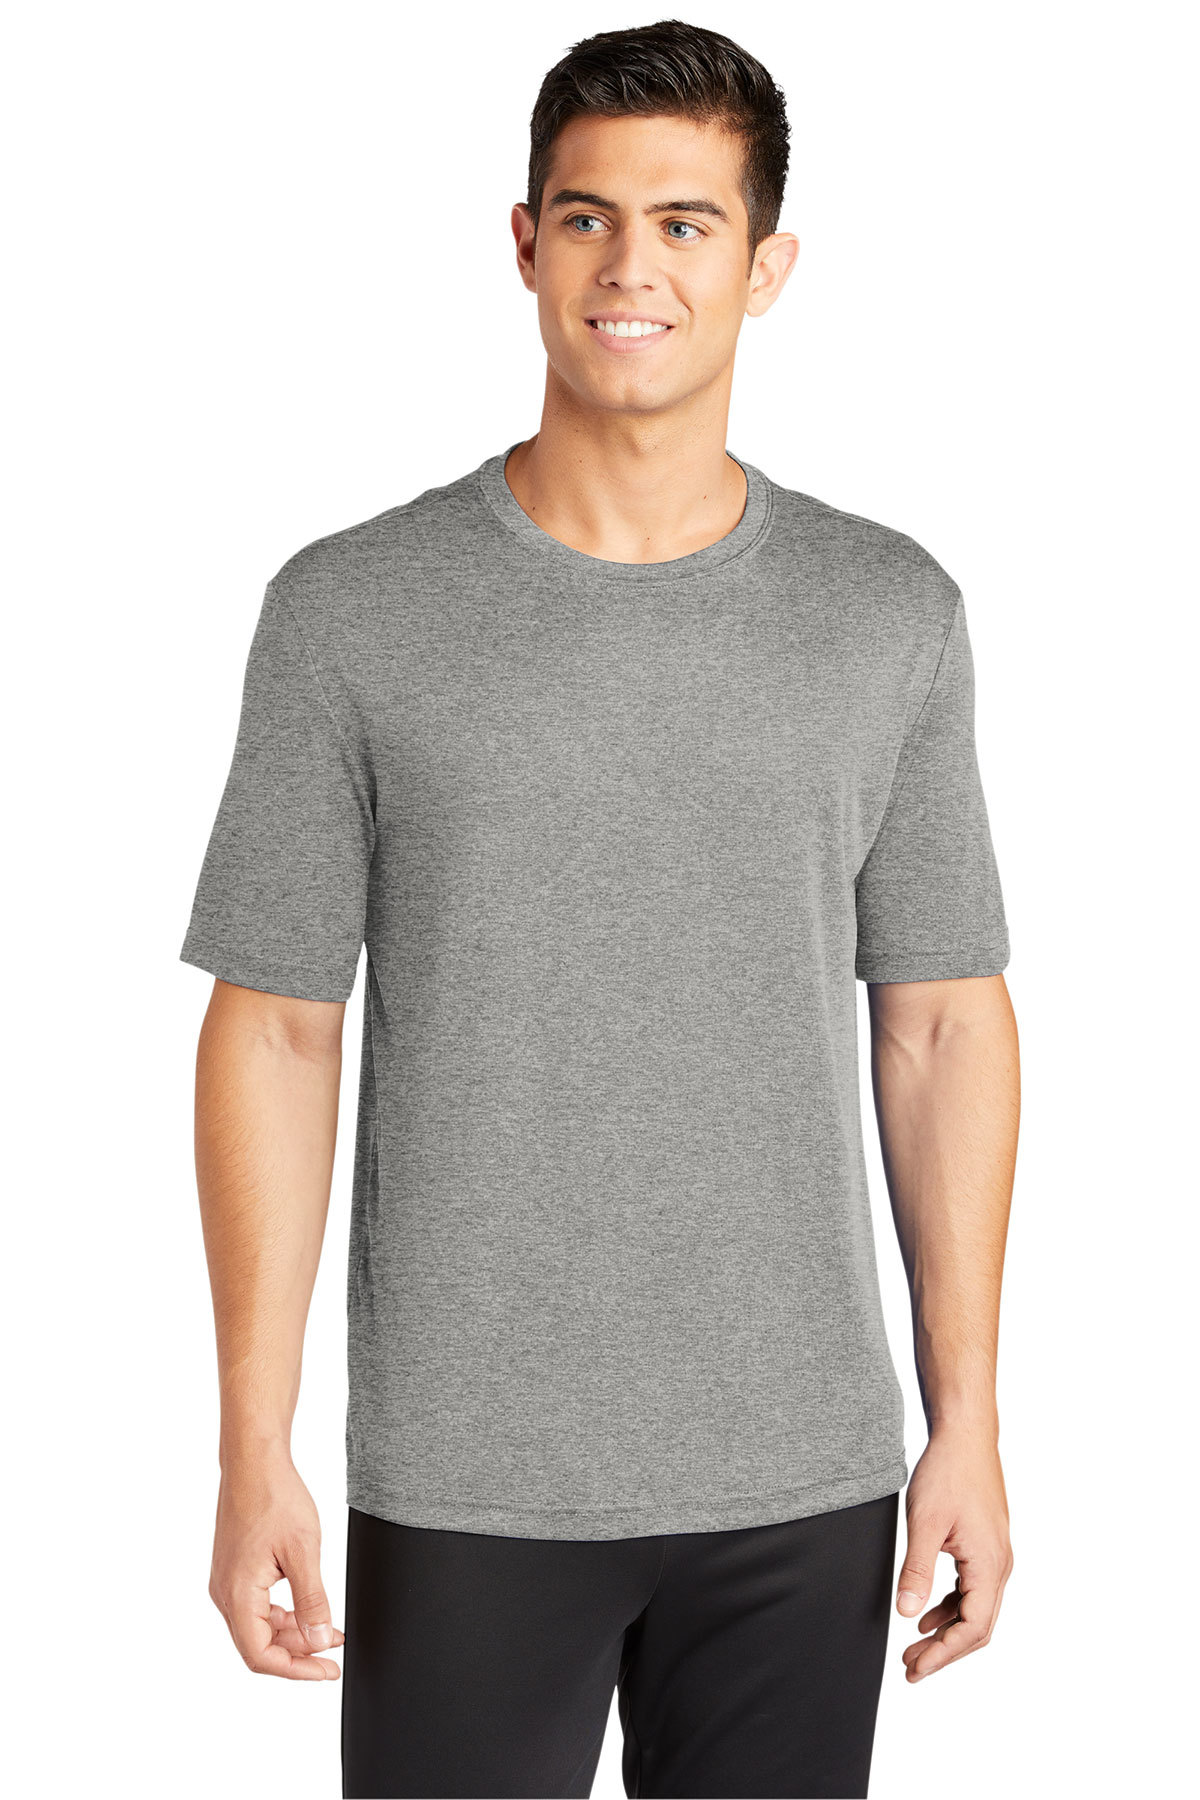 click to view Grey Concrete Heather